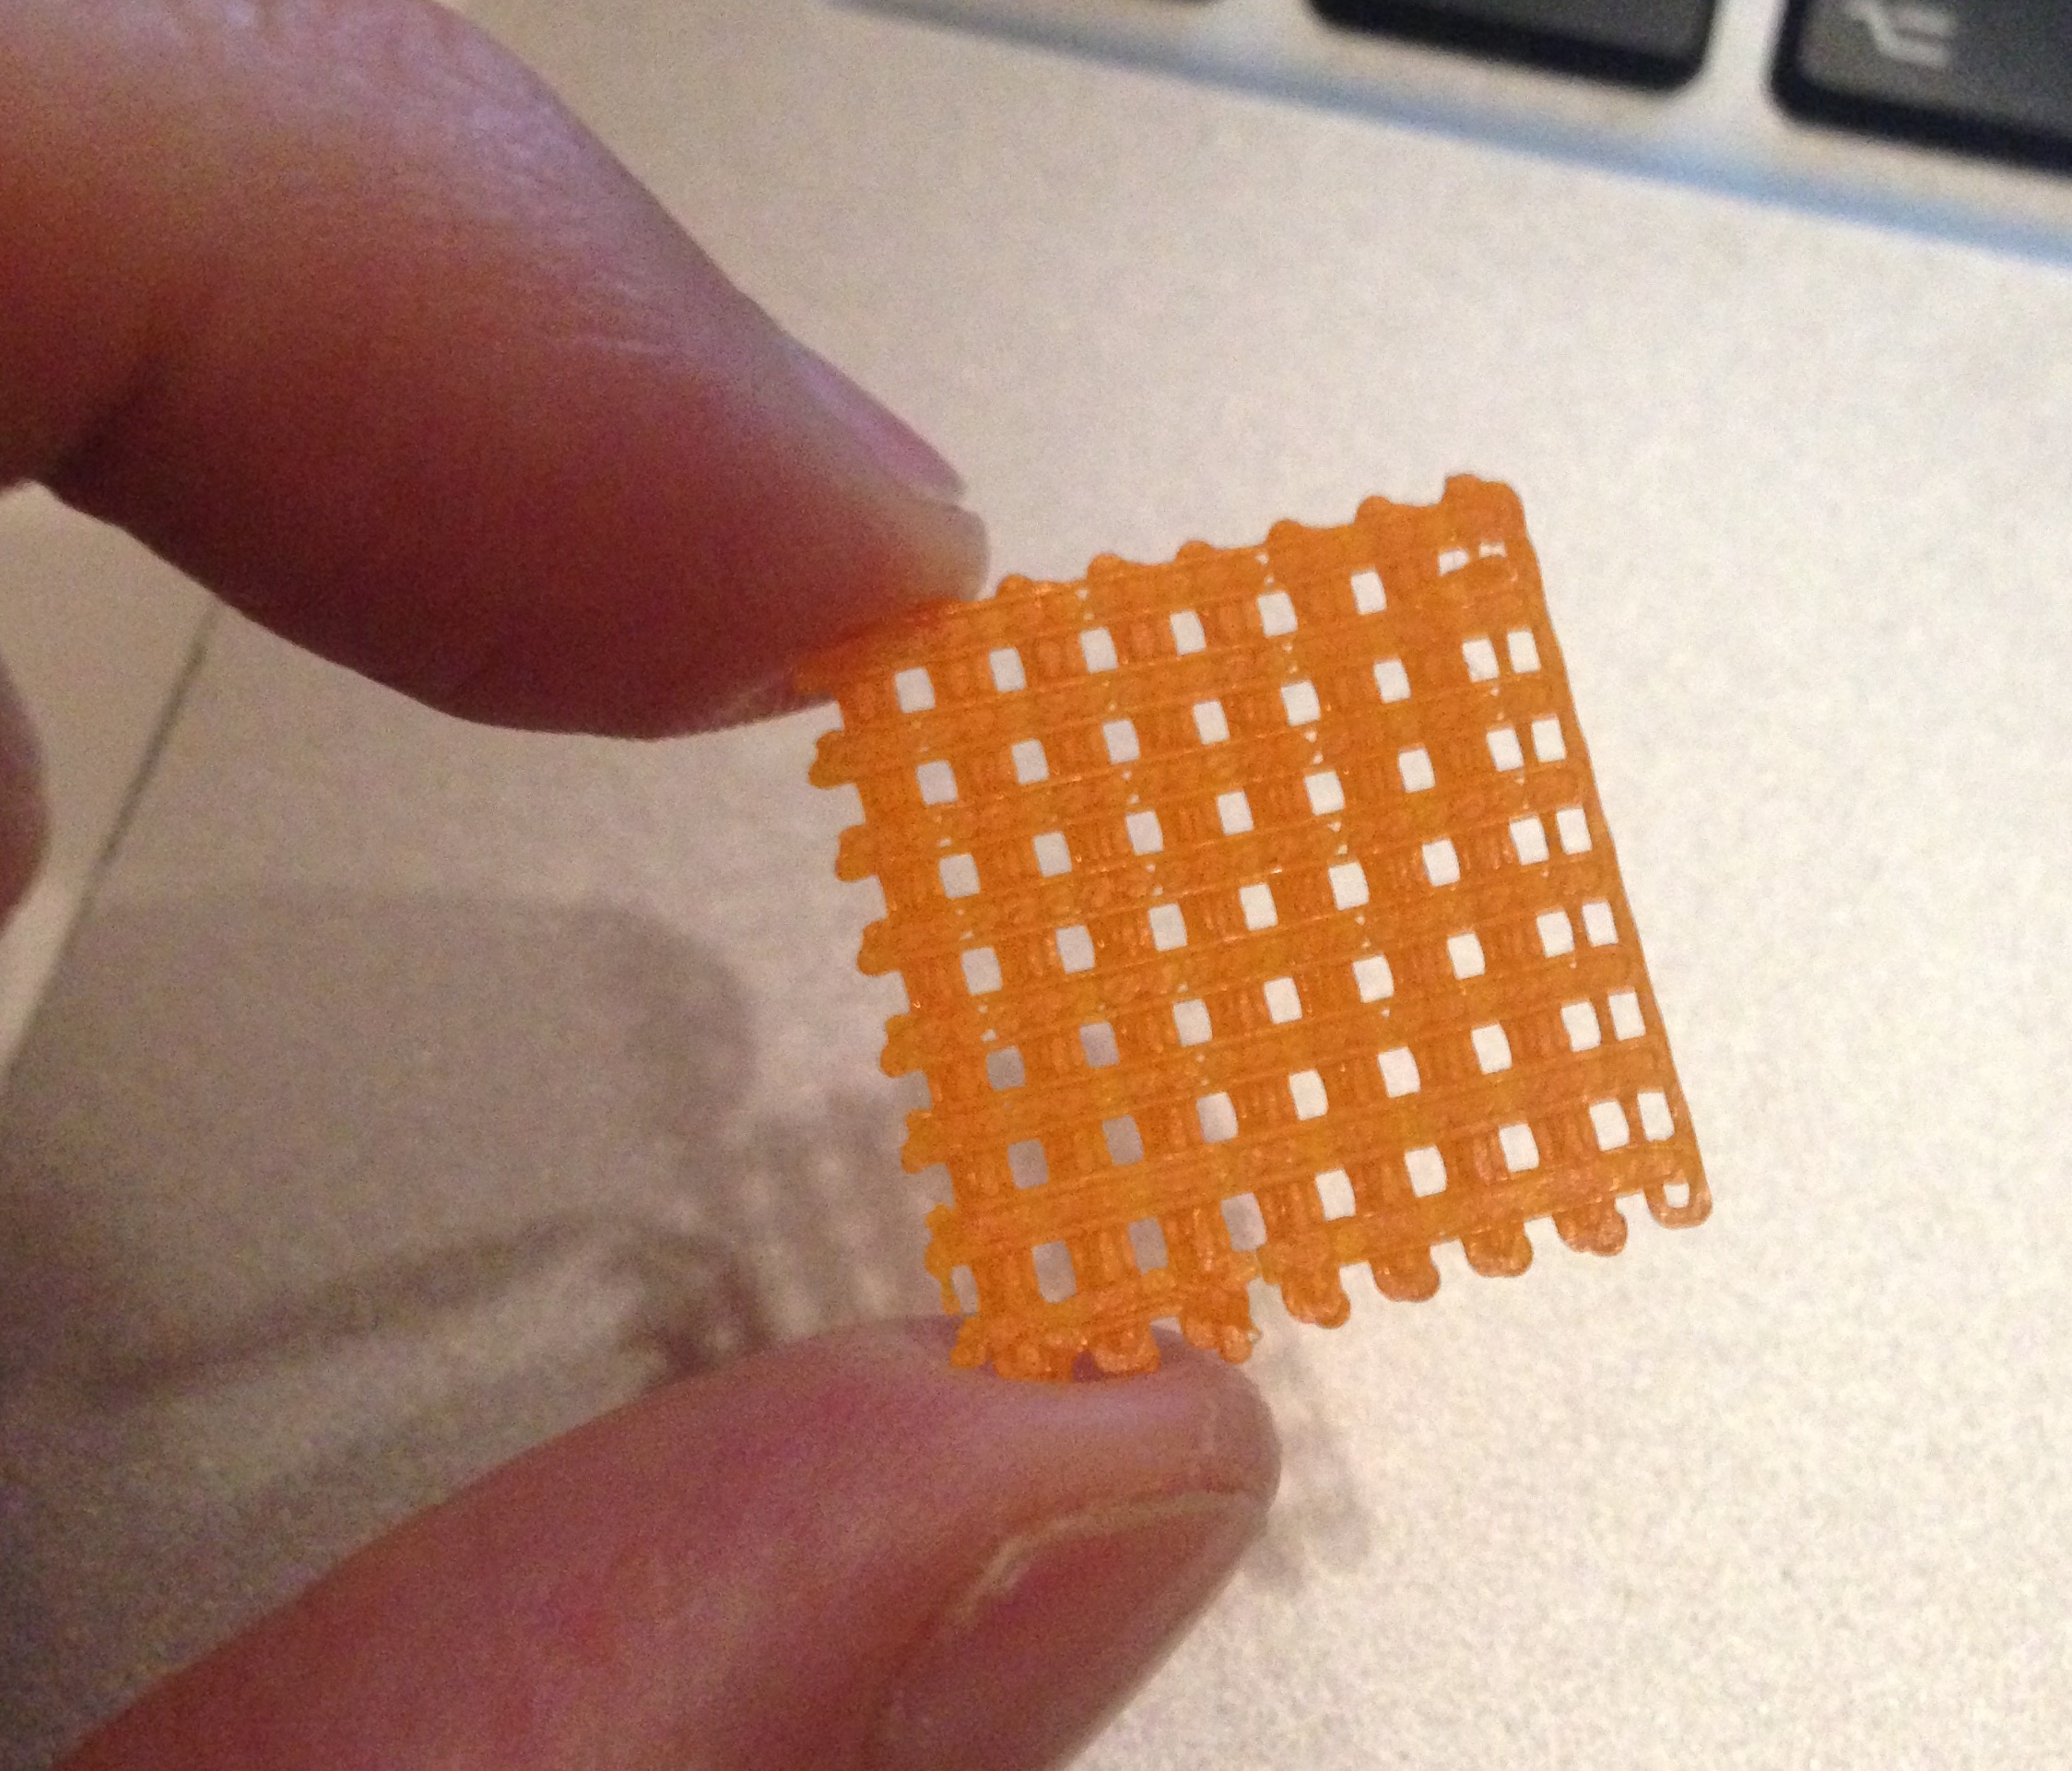  A design for reliably produced sub-millimeter holes for desktop 3D printing 